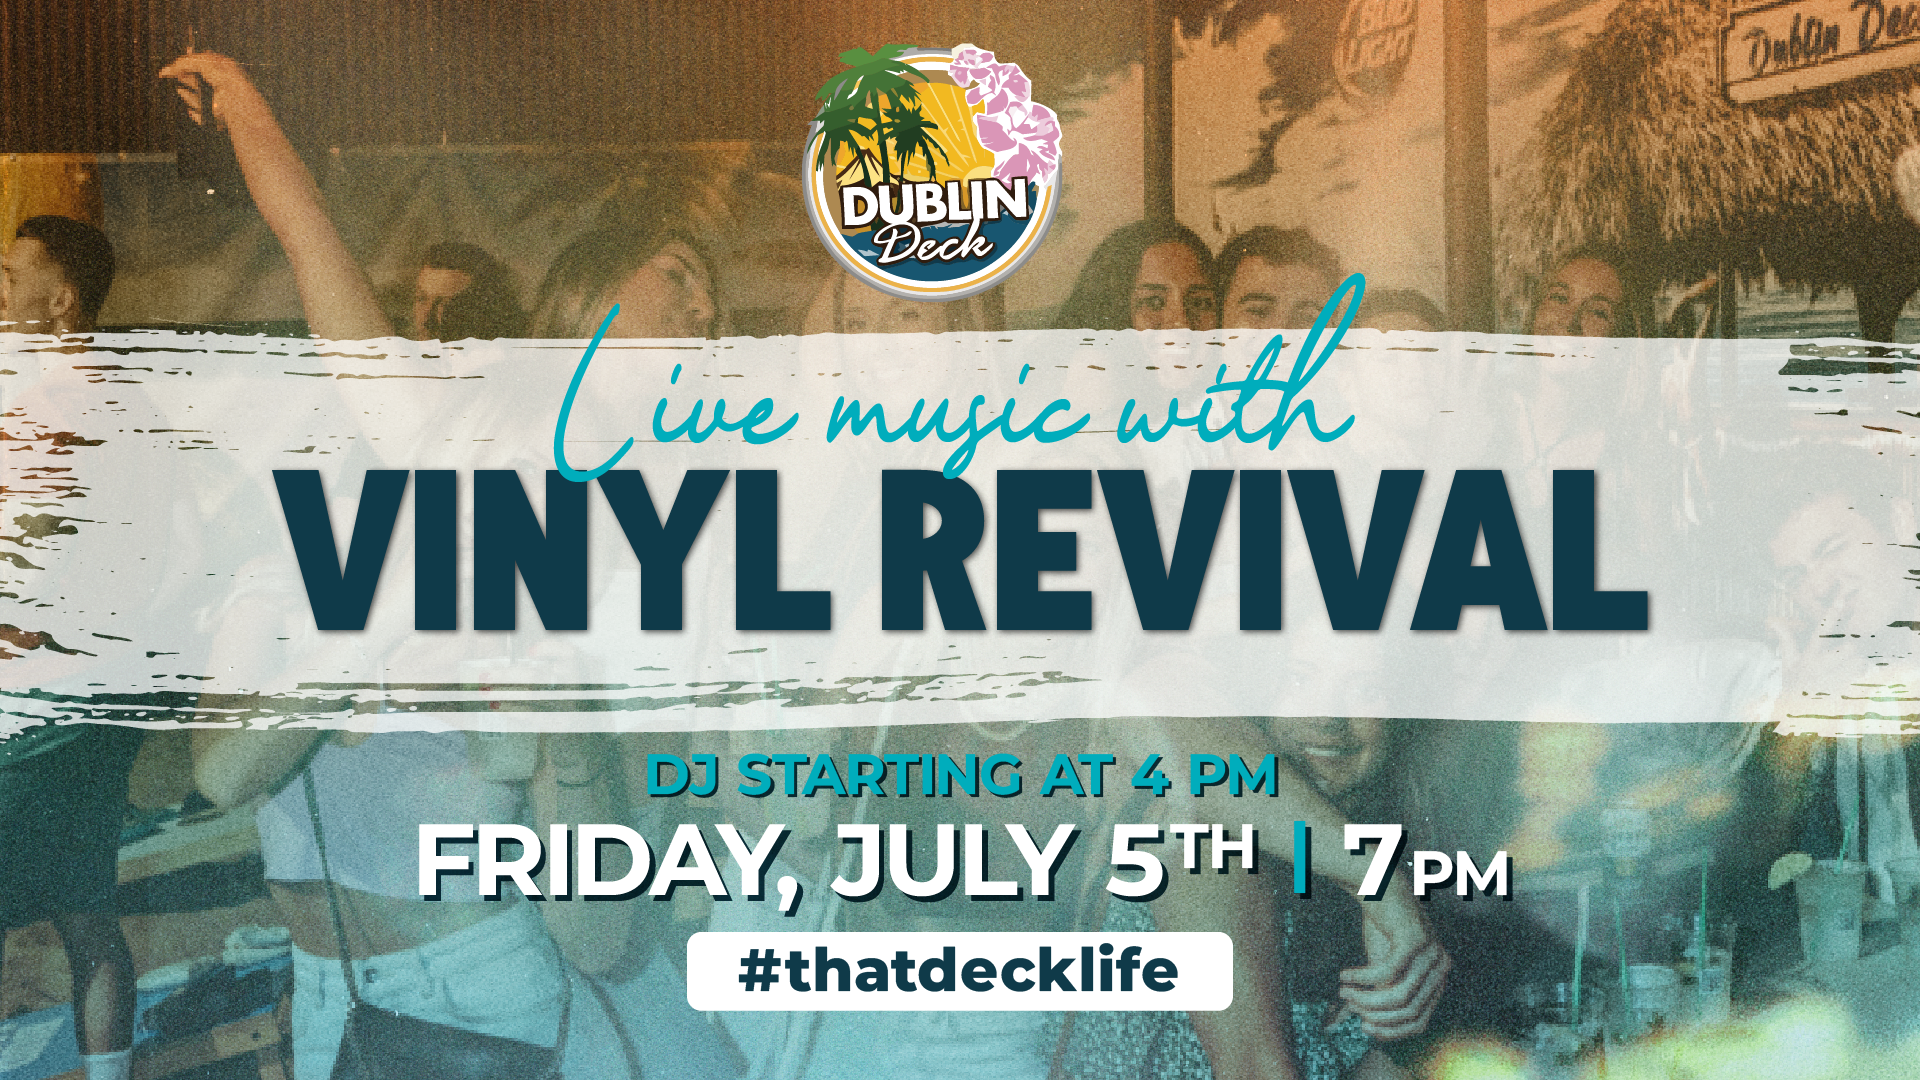 Dublin deck flyer for live music by vinyl revival on july 5th at 6 pm